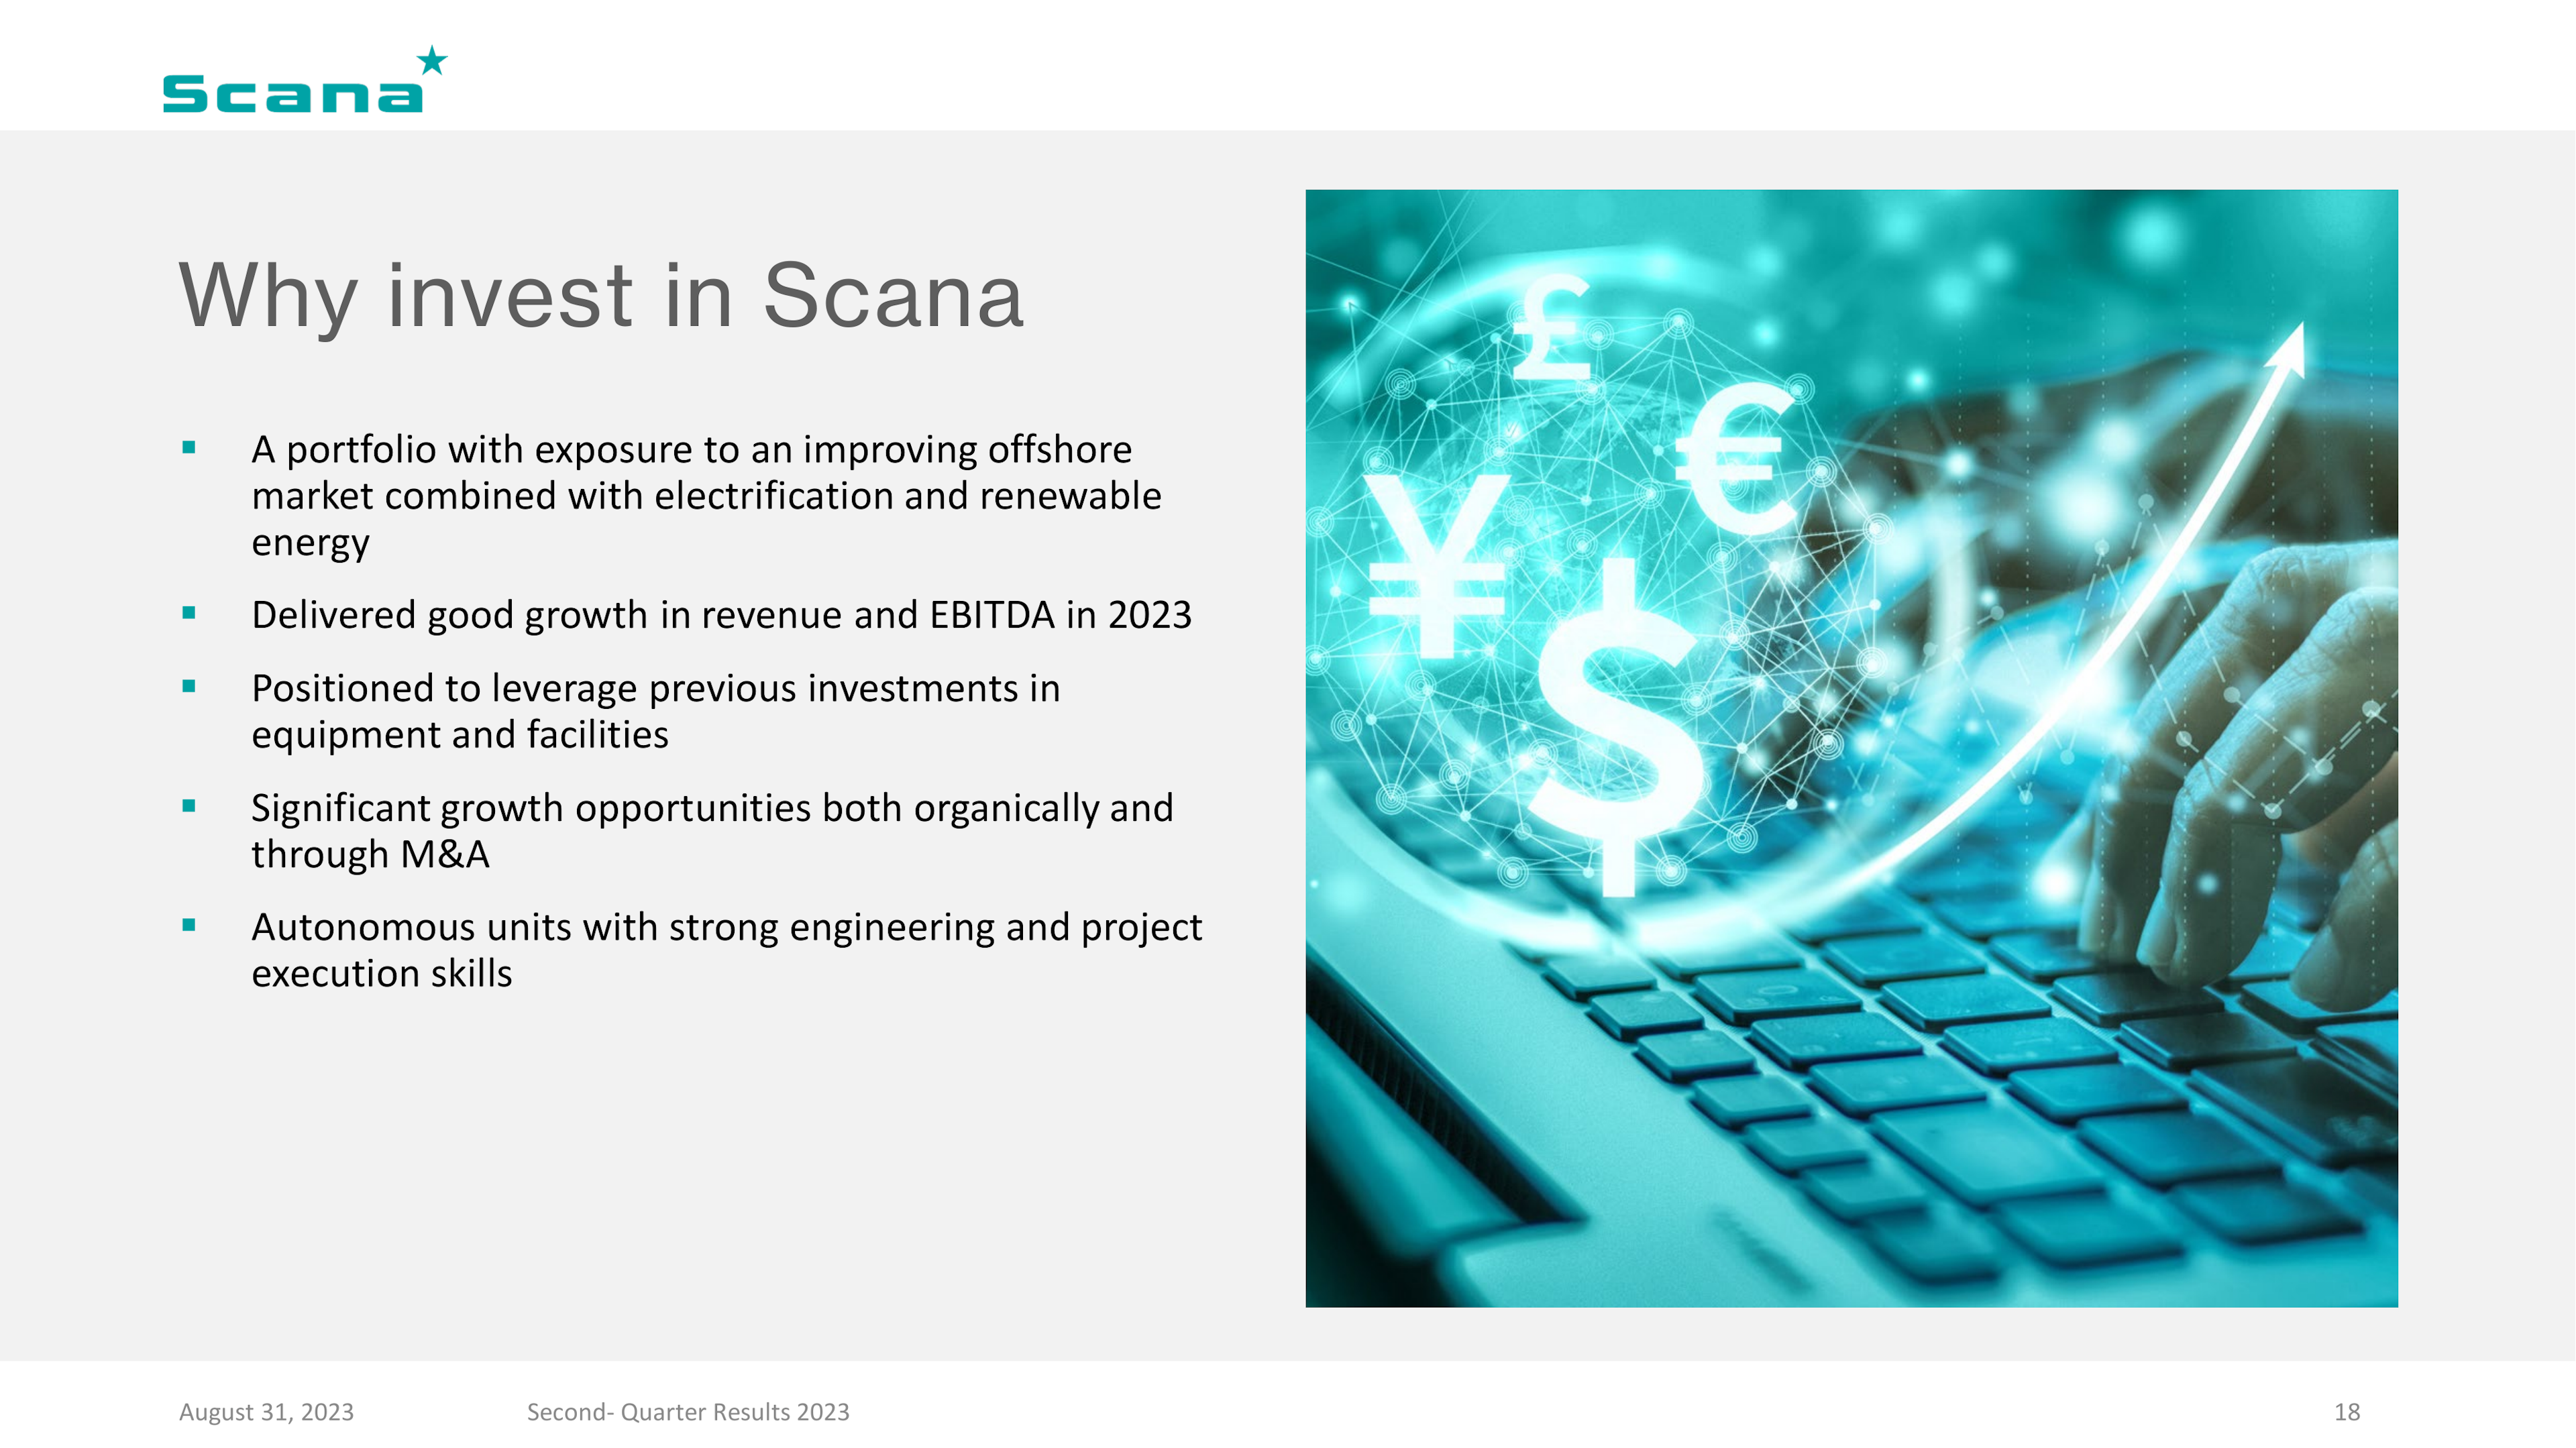 Scana * 

Why invest